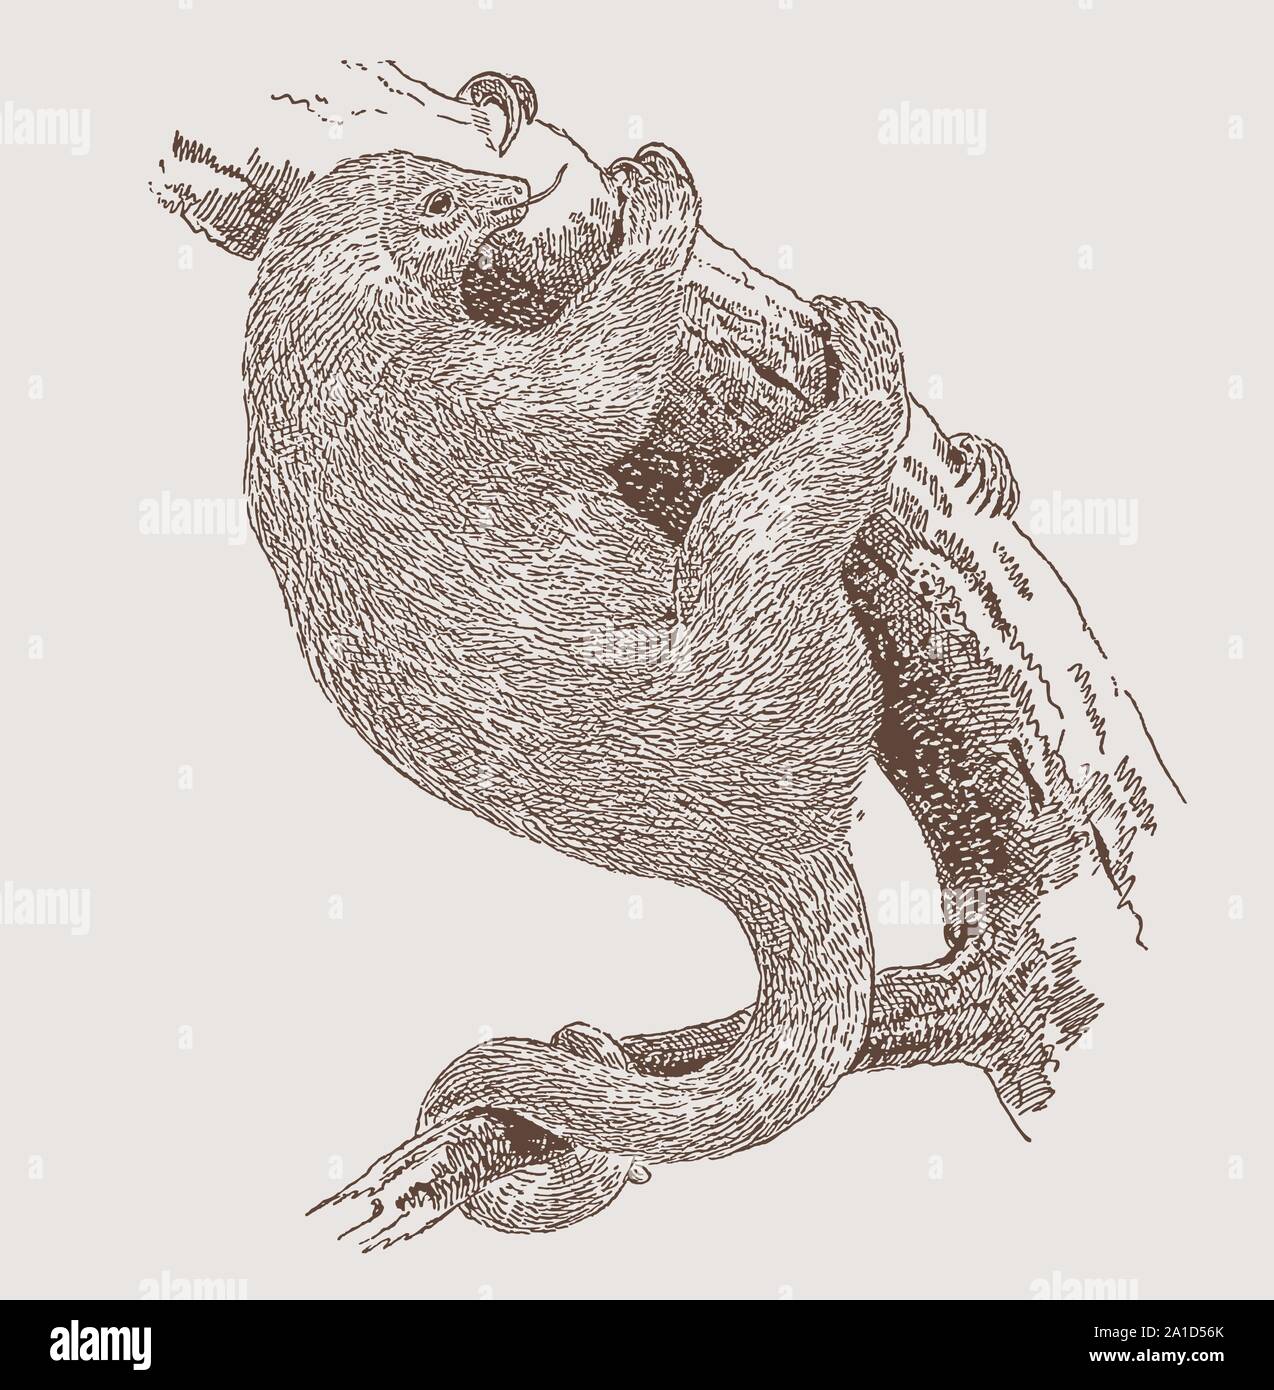 Silky anteater (cyclopes didactylus) clinging to a branch. Illustration after an engraving from the 19th century Stock Vector